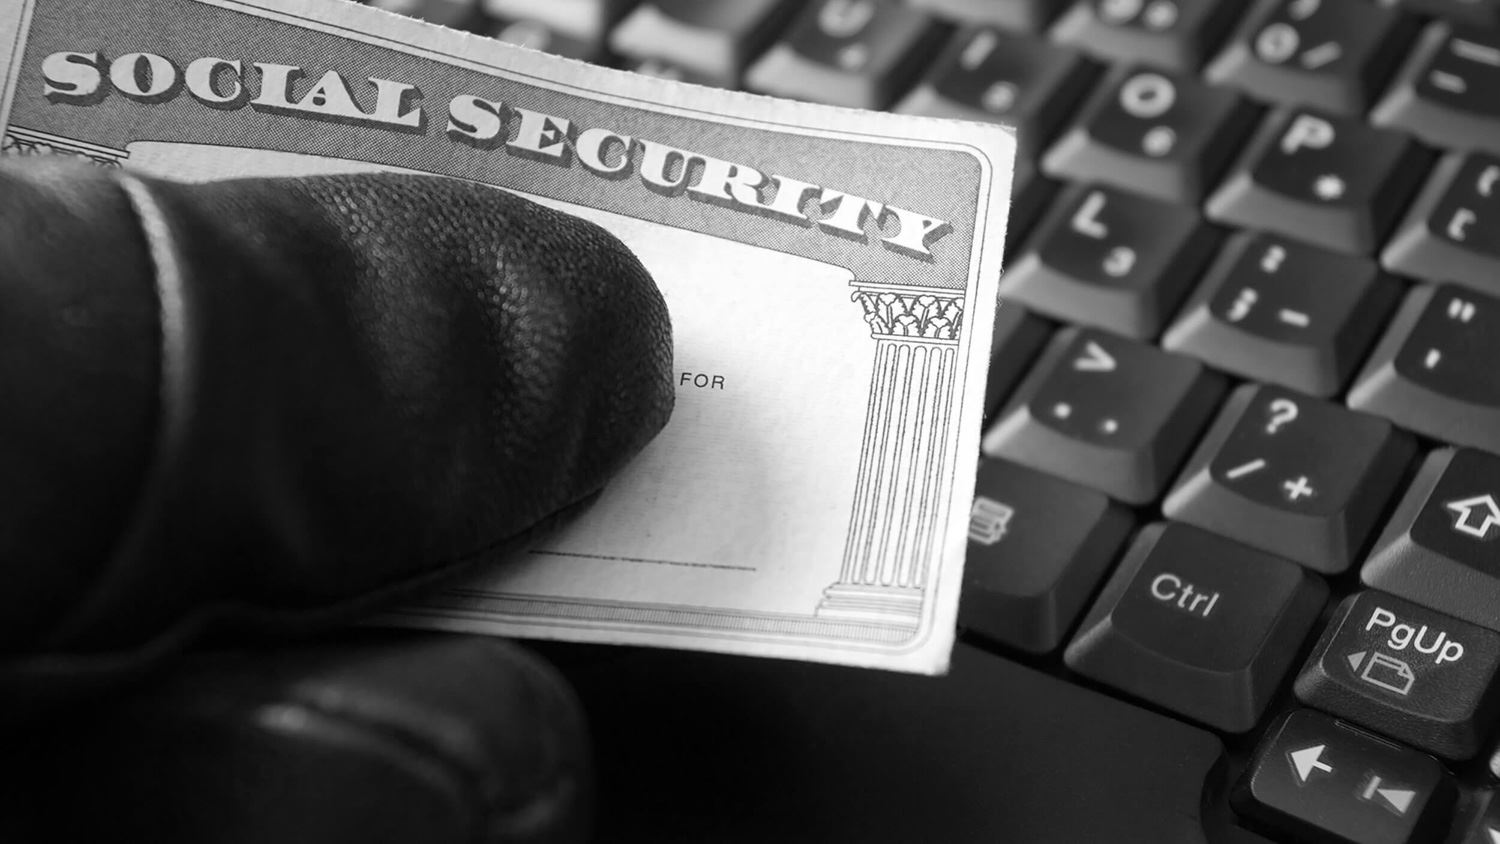 social security card information